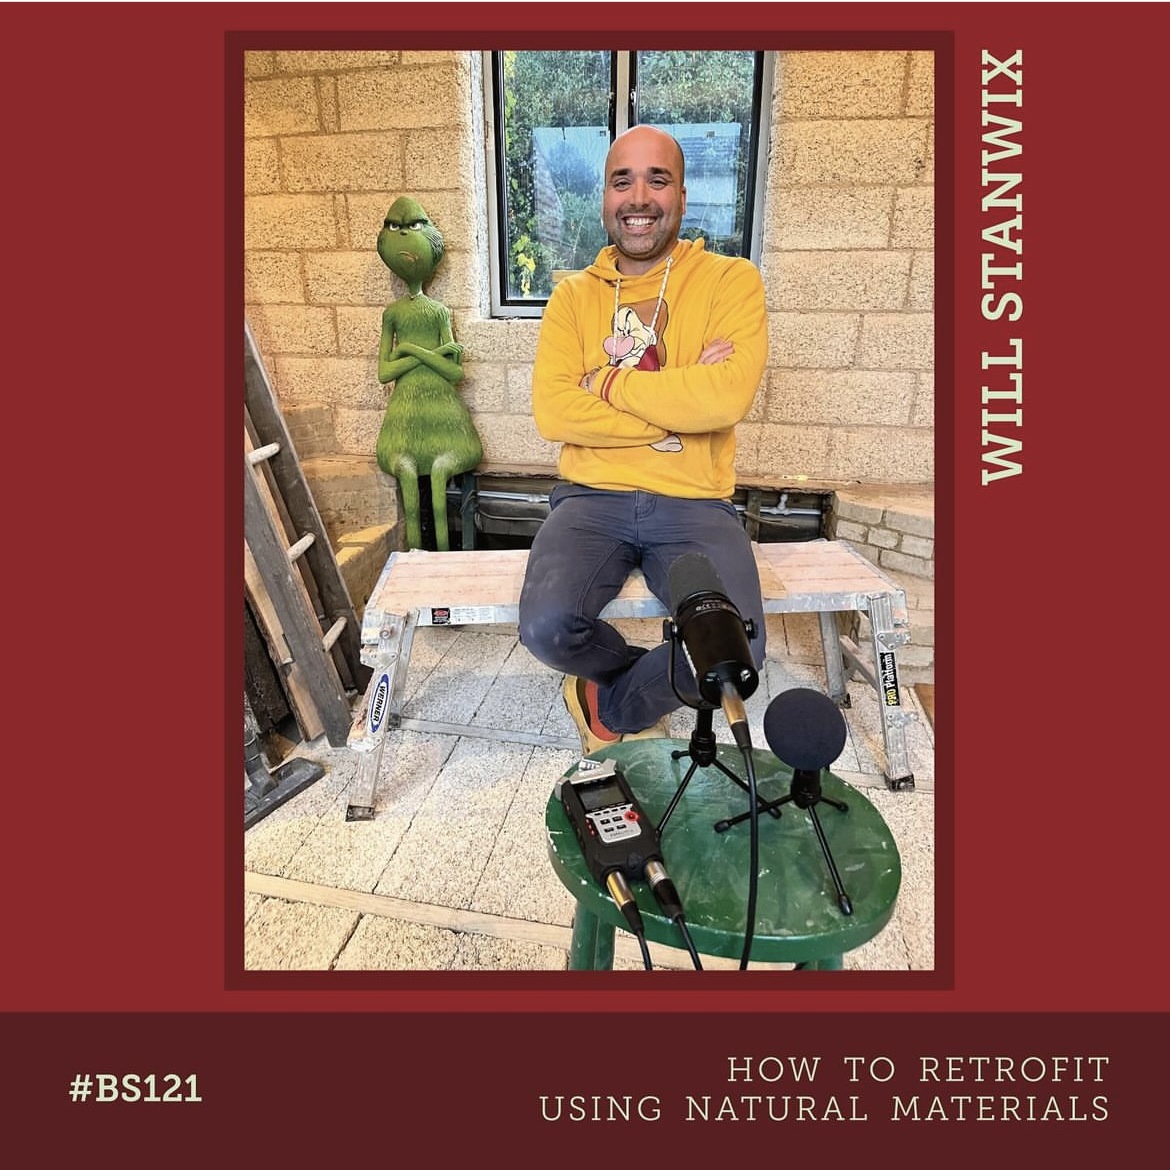 Listen up! Retrofitting using natural materials🎙️ ACAN supporter Jeffrey Hart has done an episode of his #Building Sustainability Podcast with ACAN supporter and contributor Will Stanwix about #retrofitting with natural materials. Listen now: buildingsustainabilitypodcast.com/how-to-retrofi…